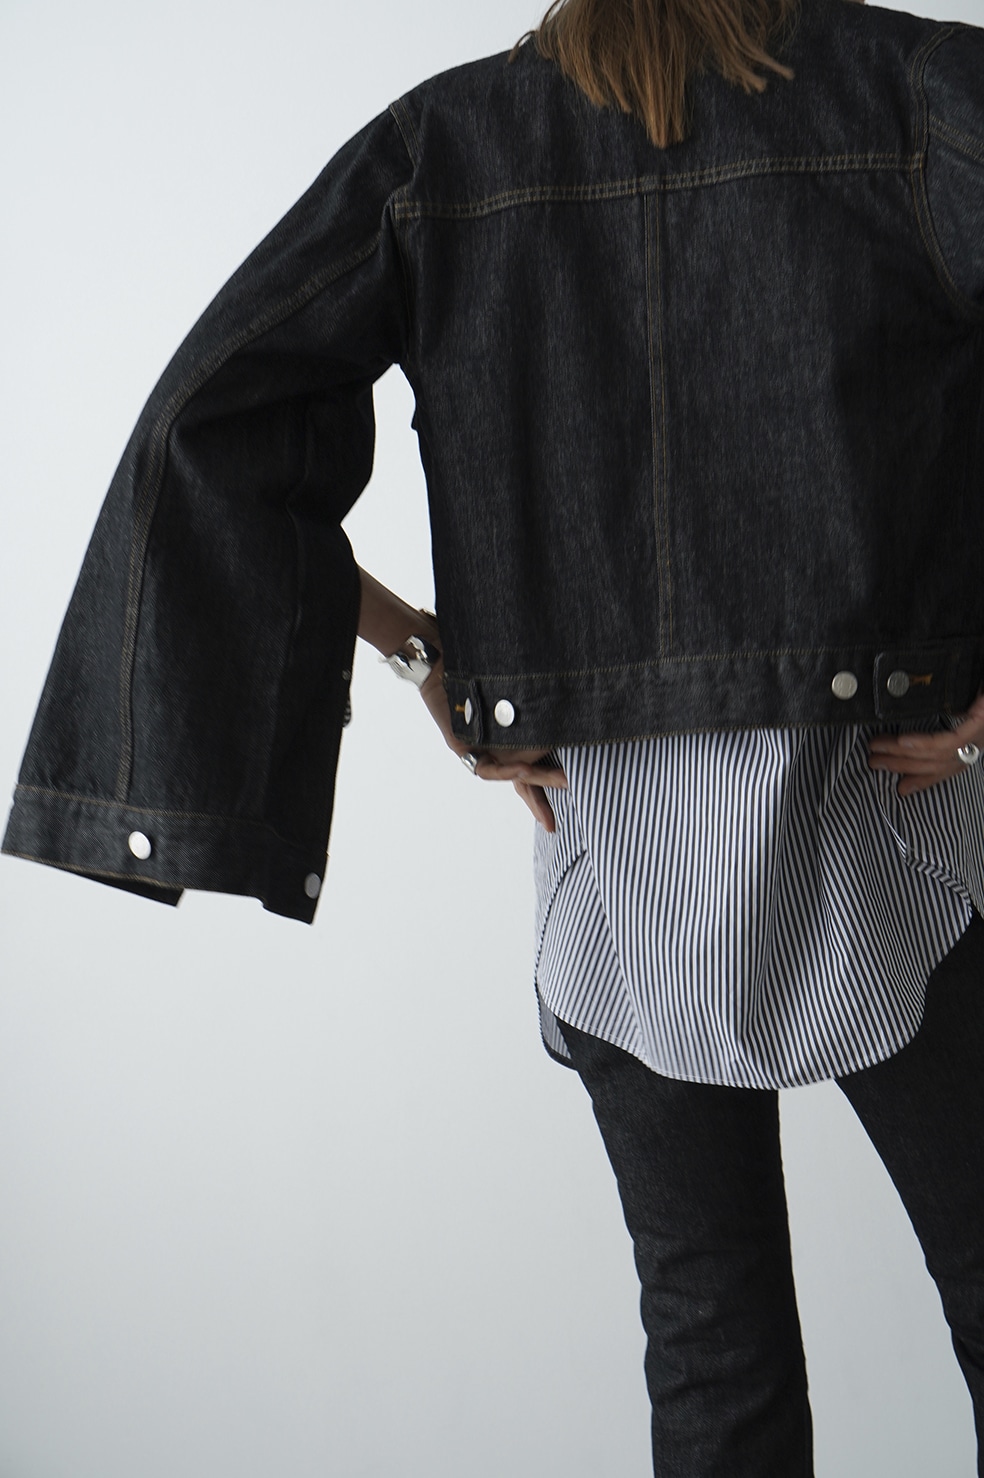 BELL SLEEVE COMPACT JEAN JACKET｜OUTER(アウター)｜CLANE OFFICIAL 